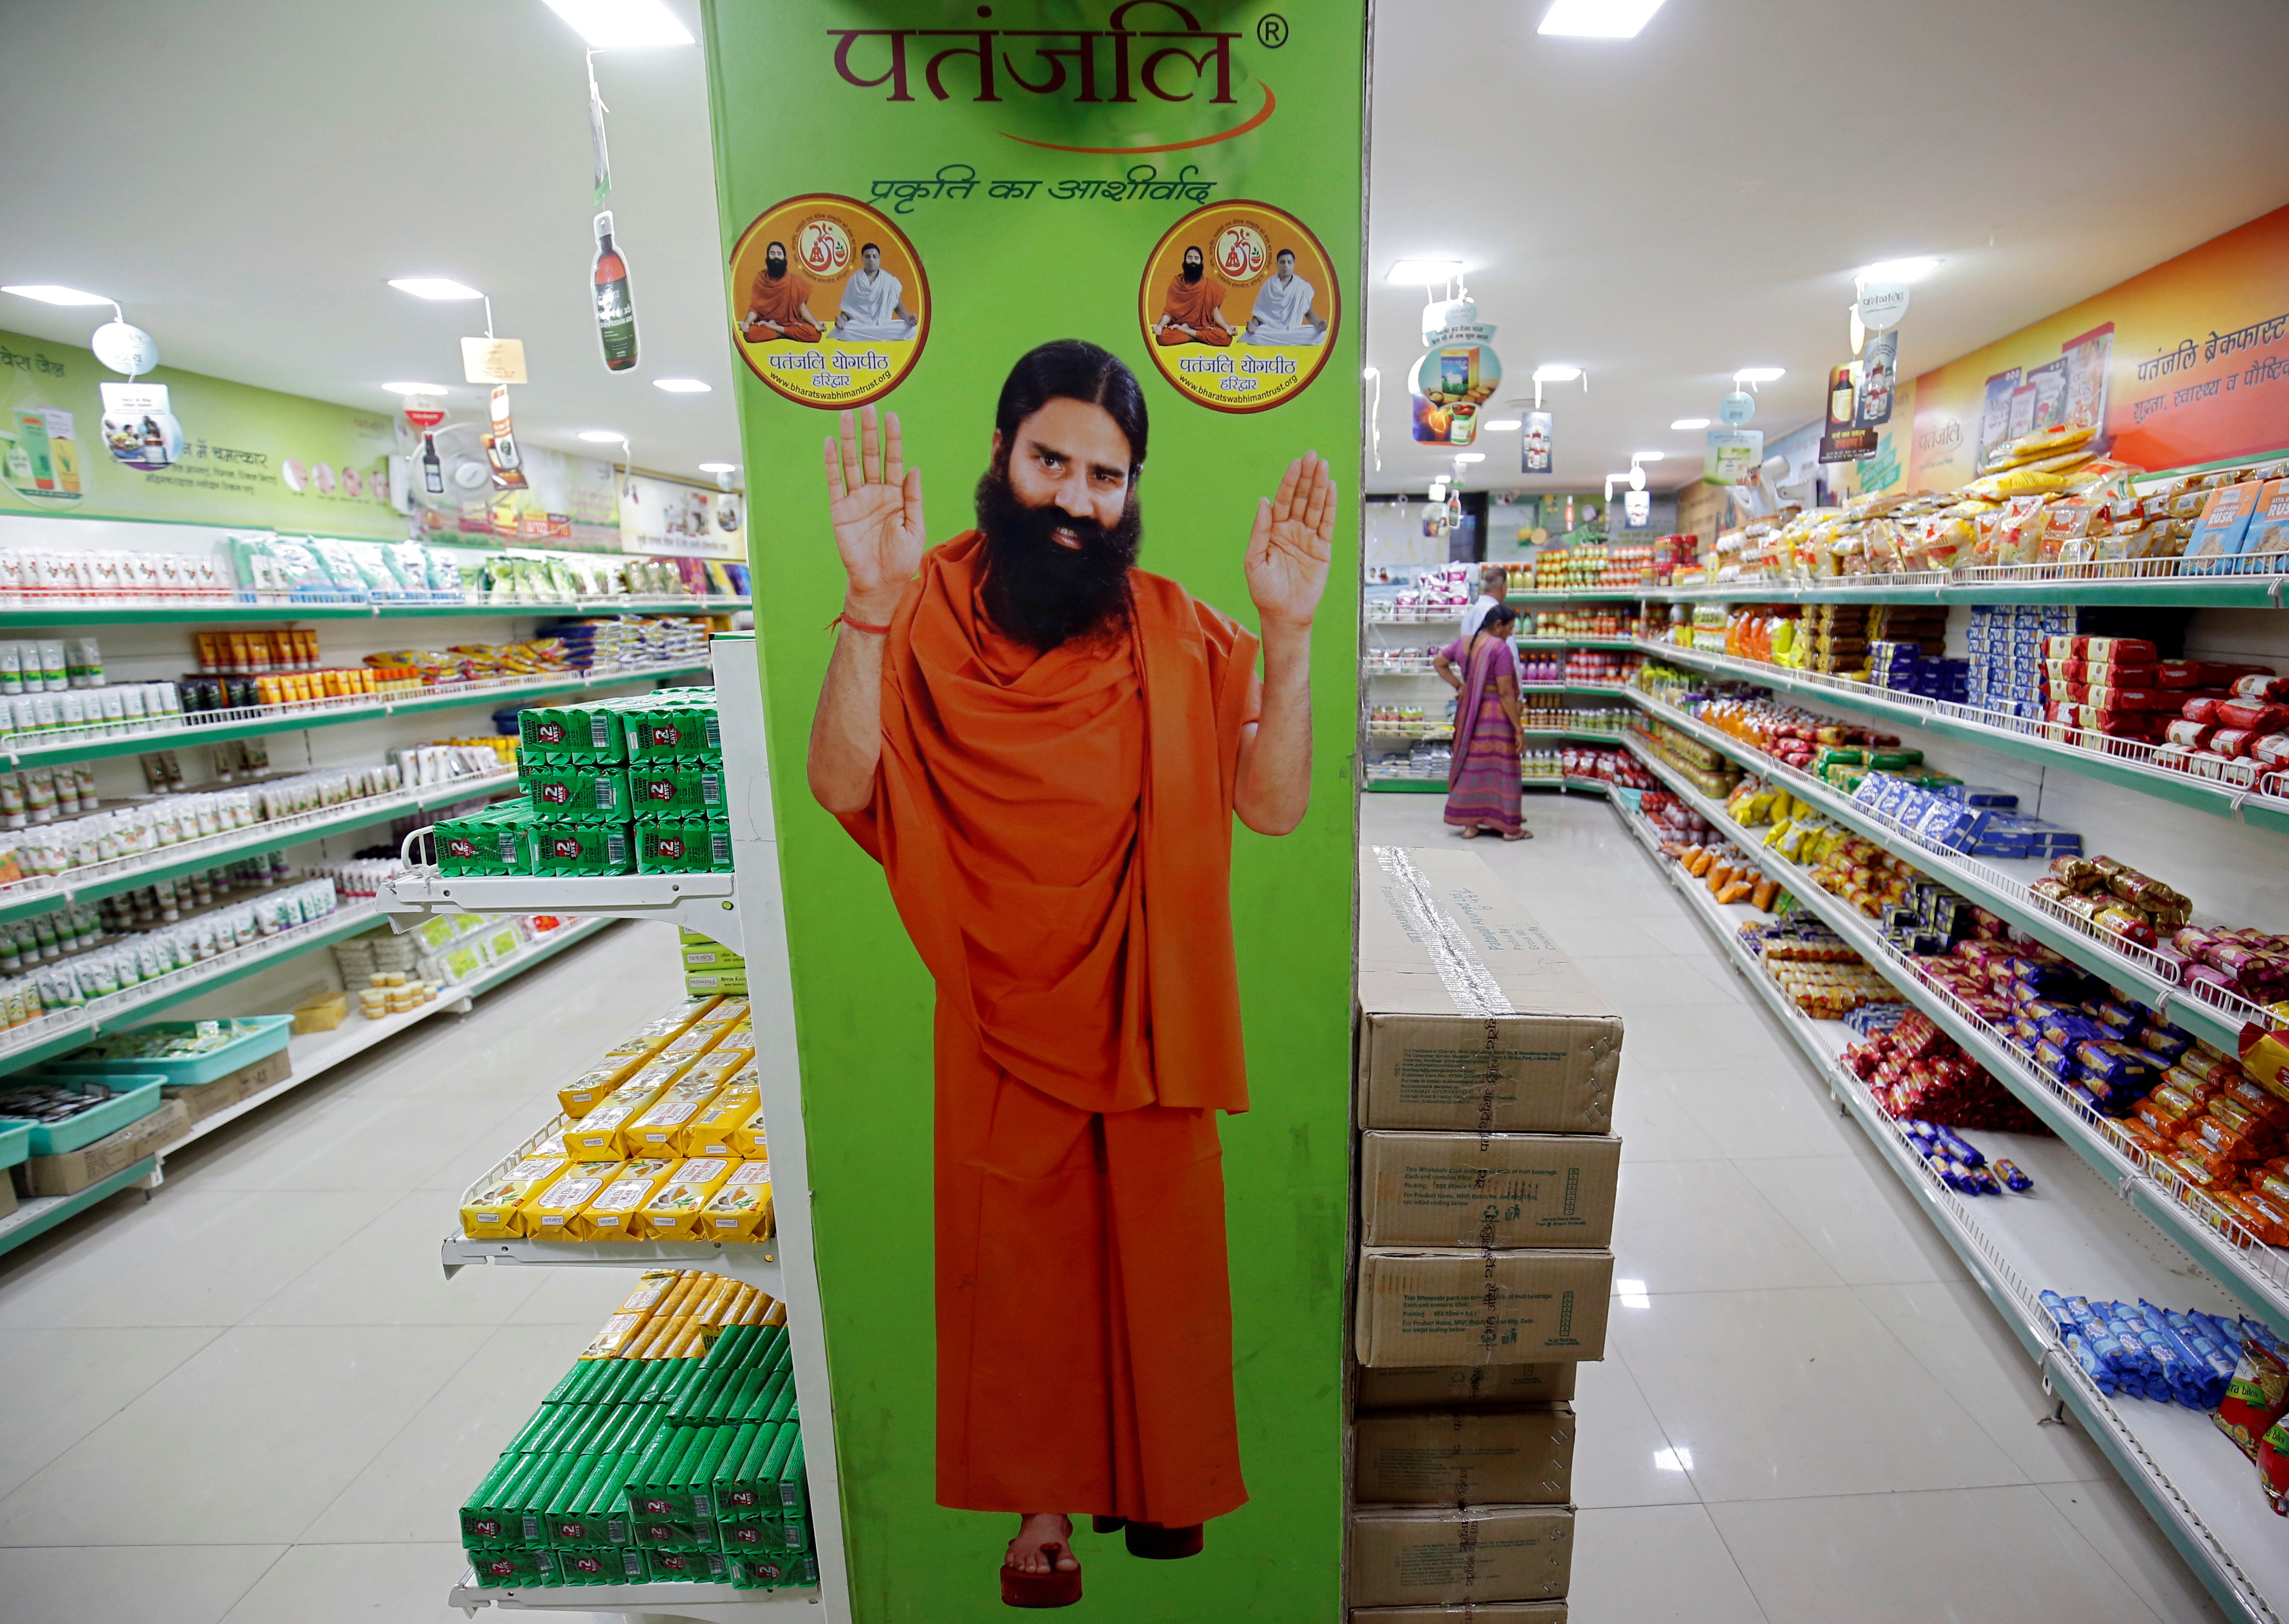 A hoarding with an image of Baba Ramdev is seen inside a Patanjali store in Ahmedabad, India, March 28, 2019. REUTERS/Amit Dave/File Photo